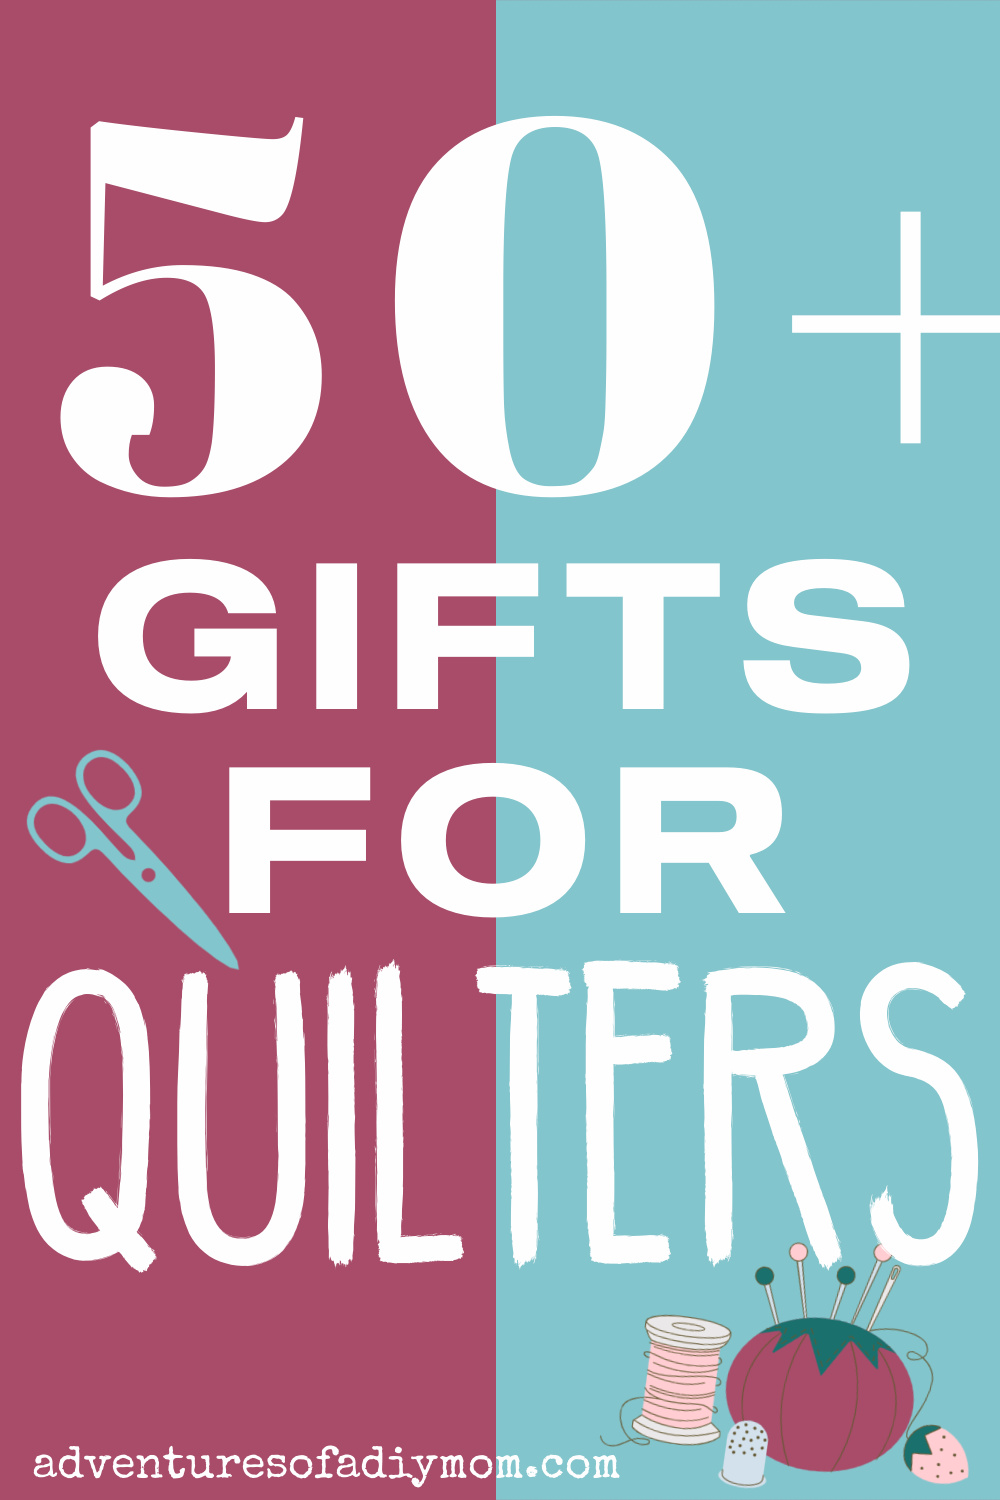 Coffee Quilt Nap Repeat: vintage quilt gifts for quilters, Quilter